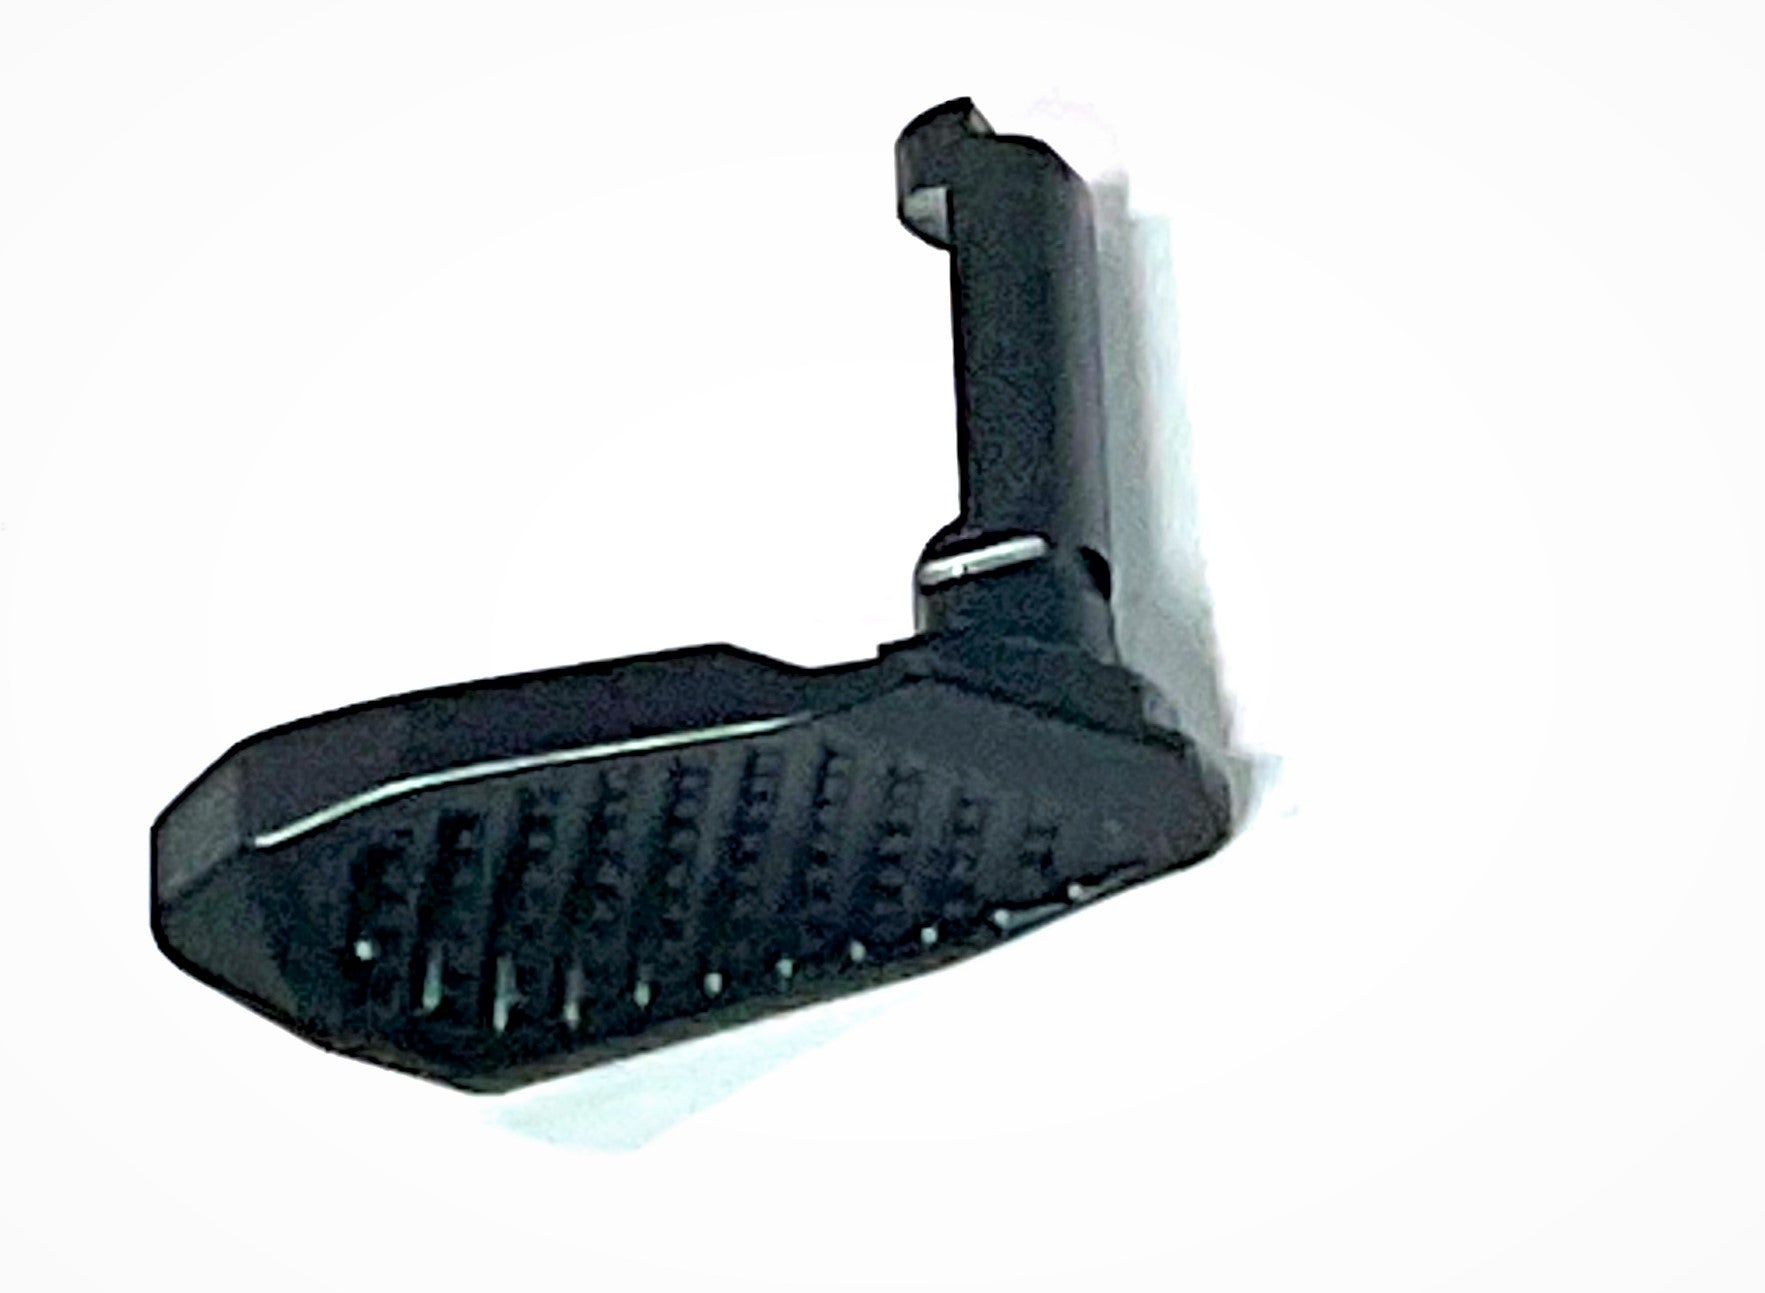 Gas Pedal  ® Take down lever for Hellcat